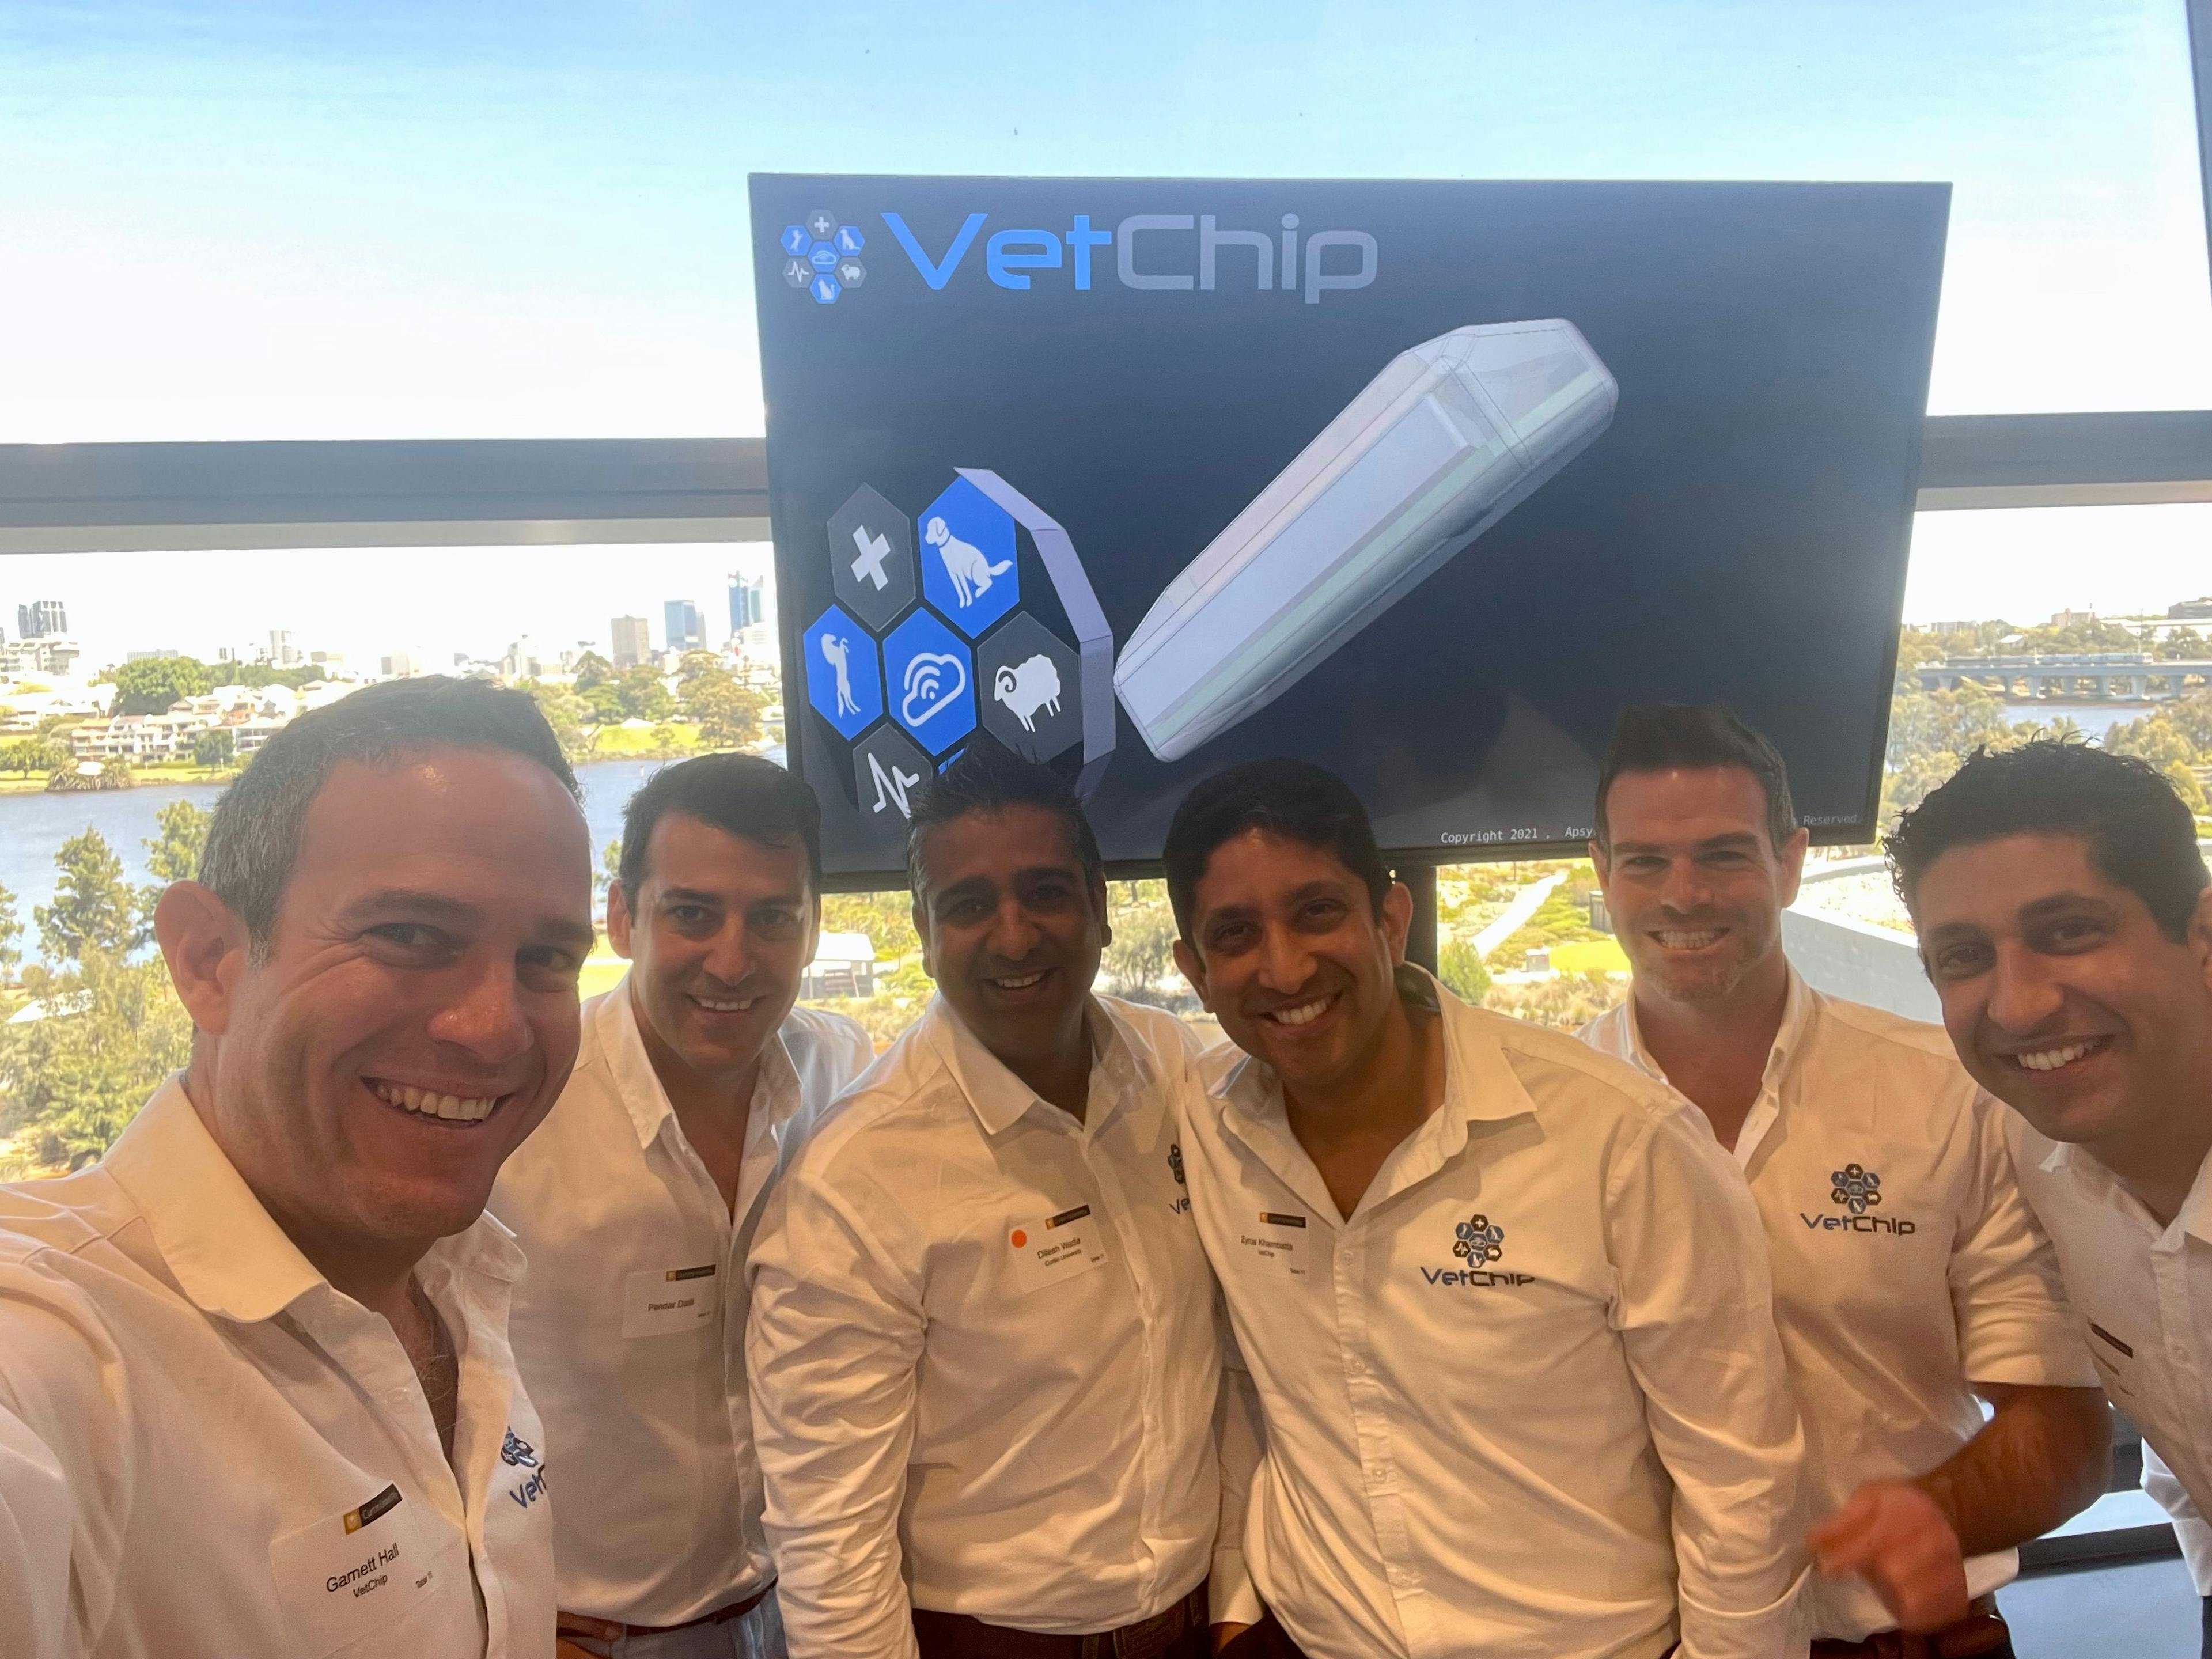 The VetChip team pictured with co-founder Dr Garnett Hall (Photo courtesy of VetChip).